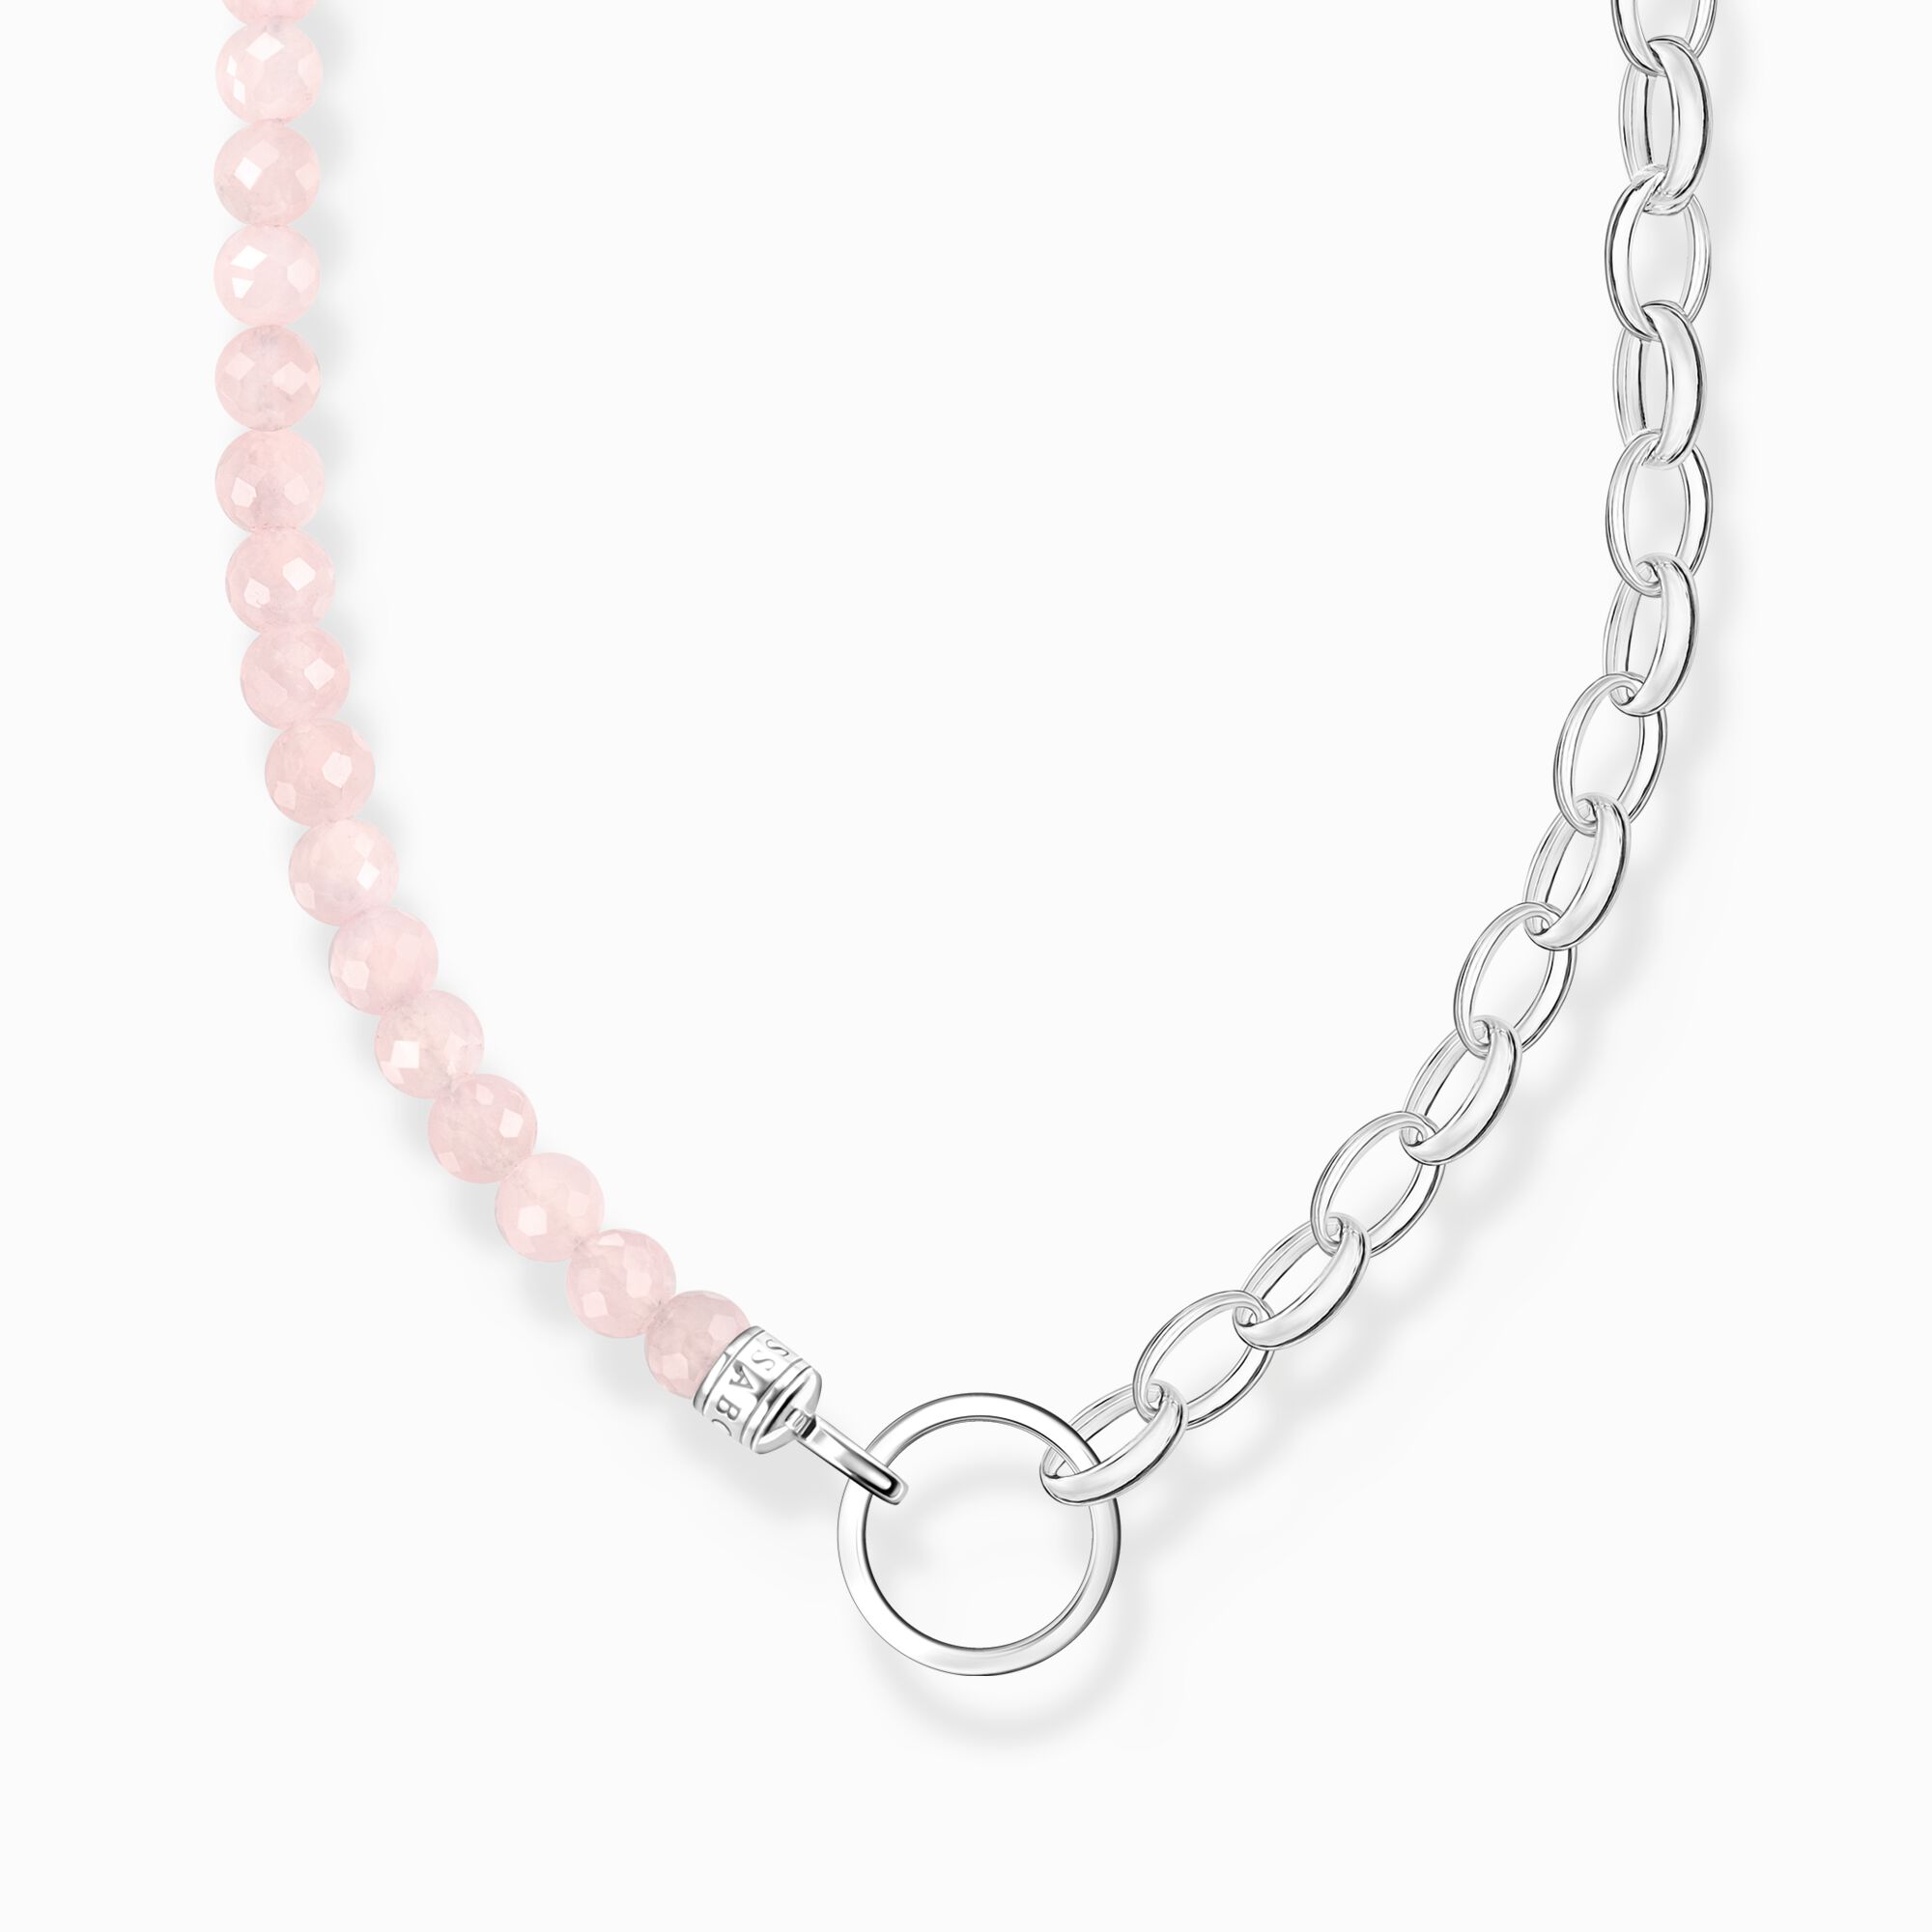 Charm necklace with beads of rose quartz and chain links silver from the Charm Club collection in the THOMAS SABO online store